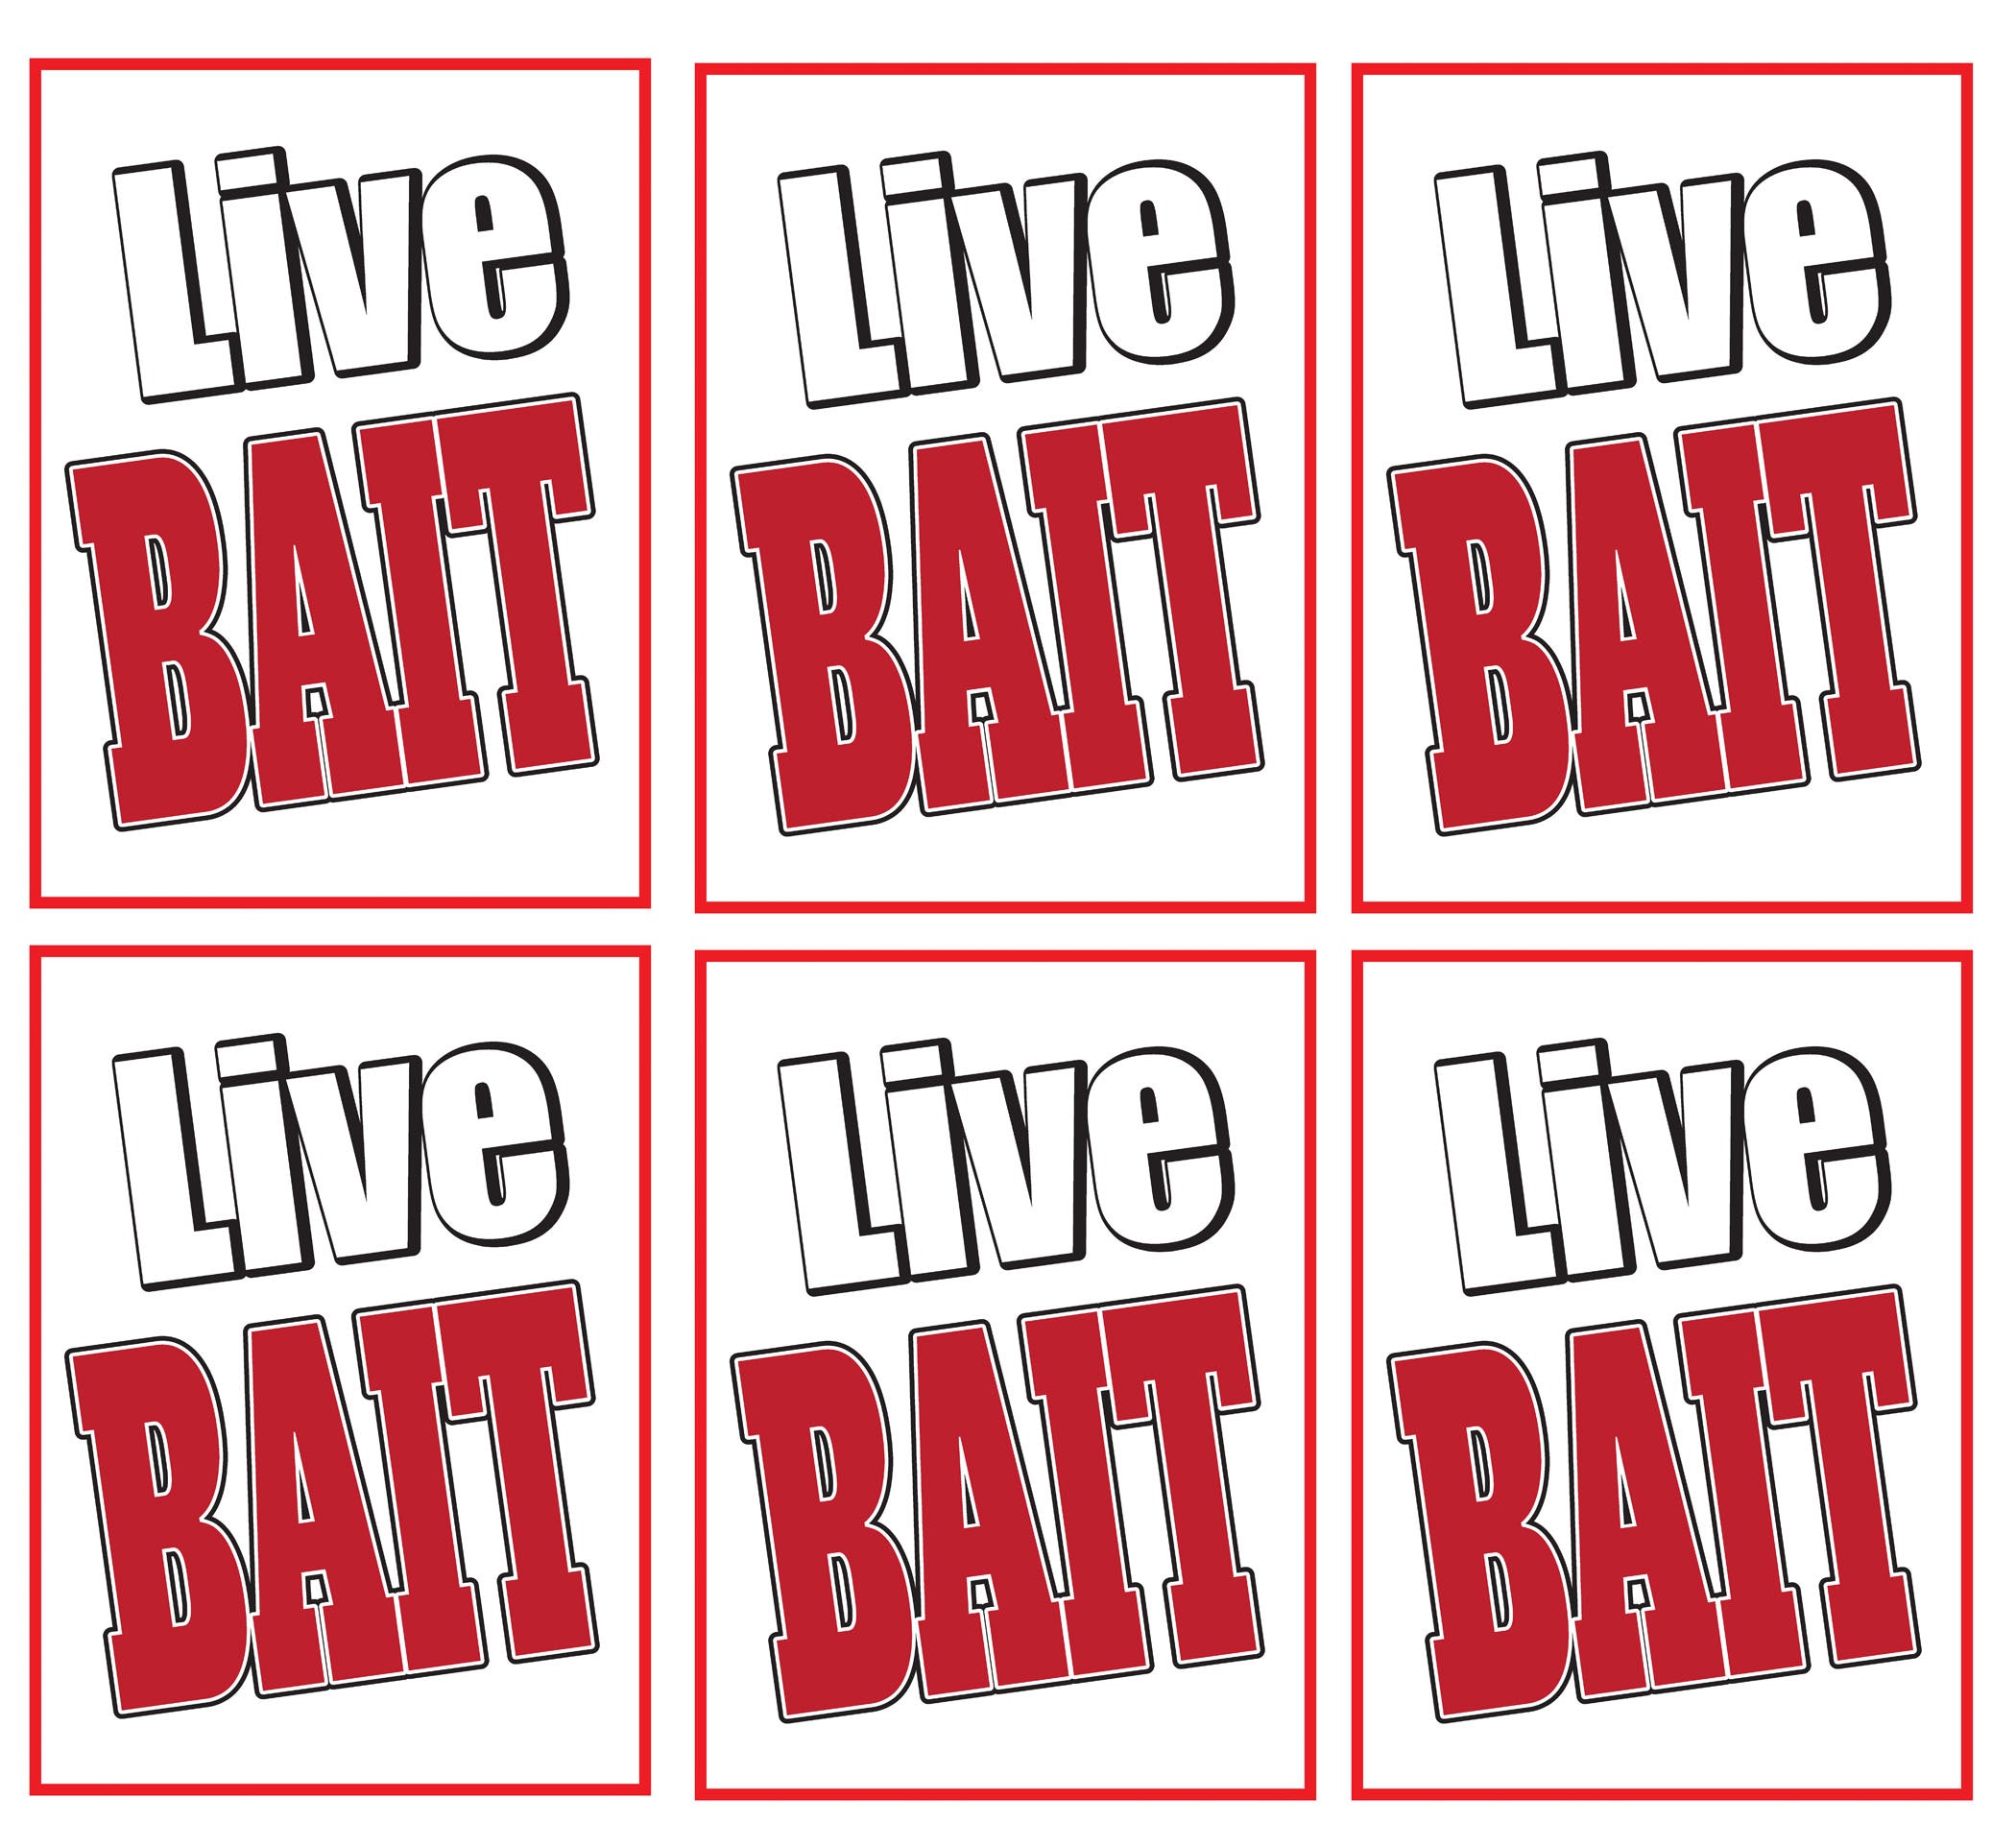 Live Bait Store Window Display Paper Signs; 18w x 24h - 6 Pack